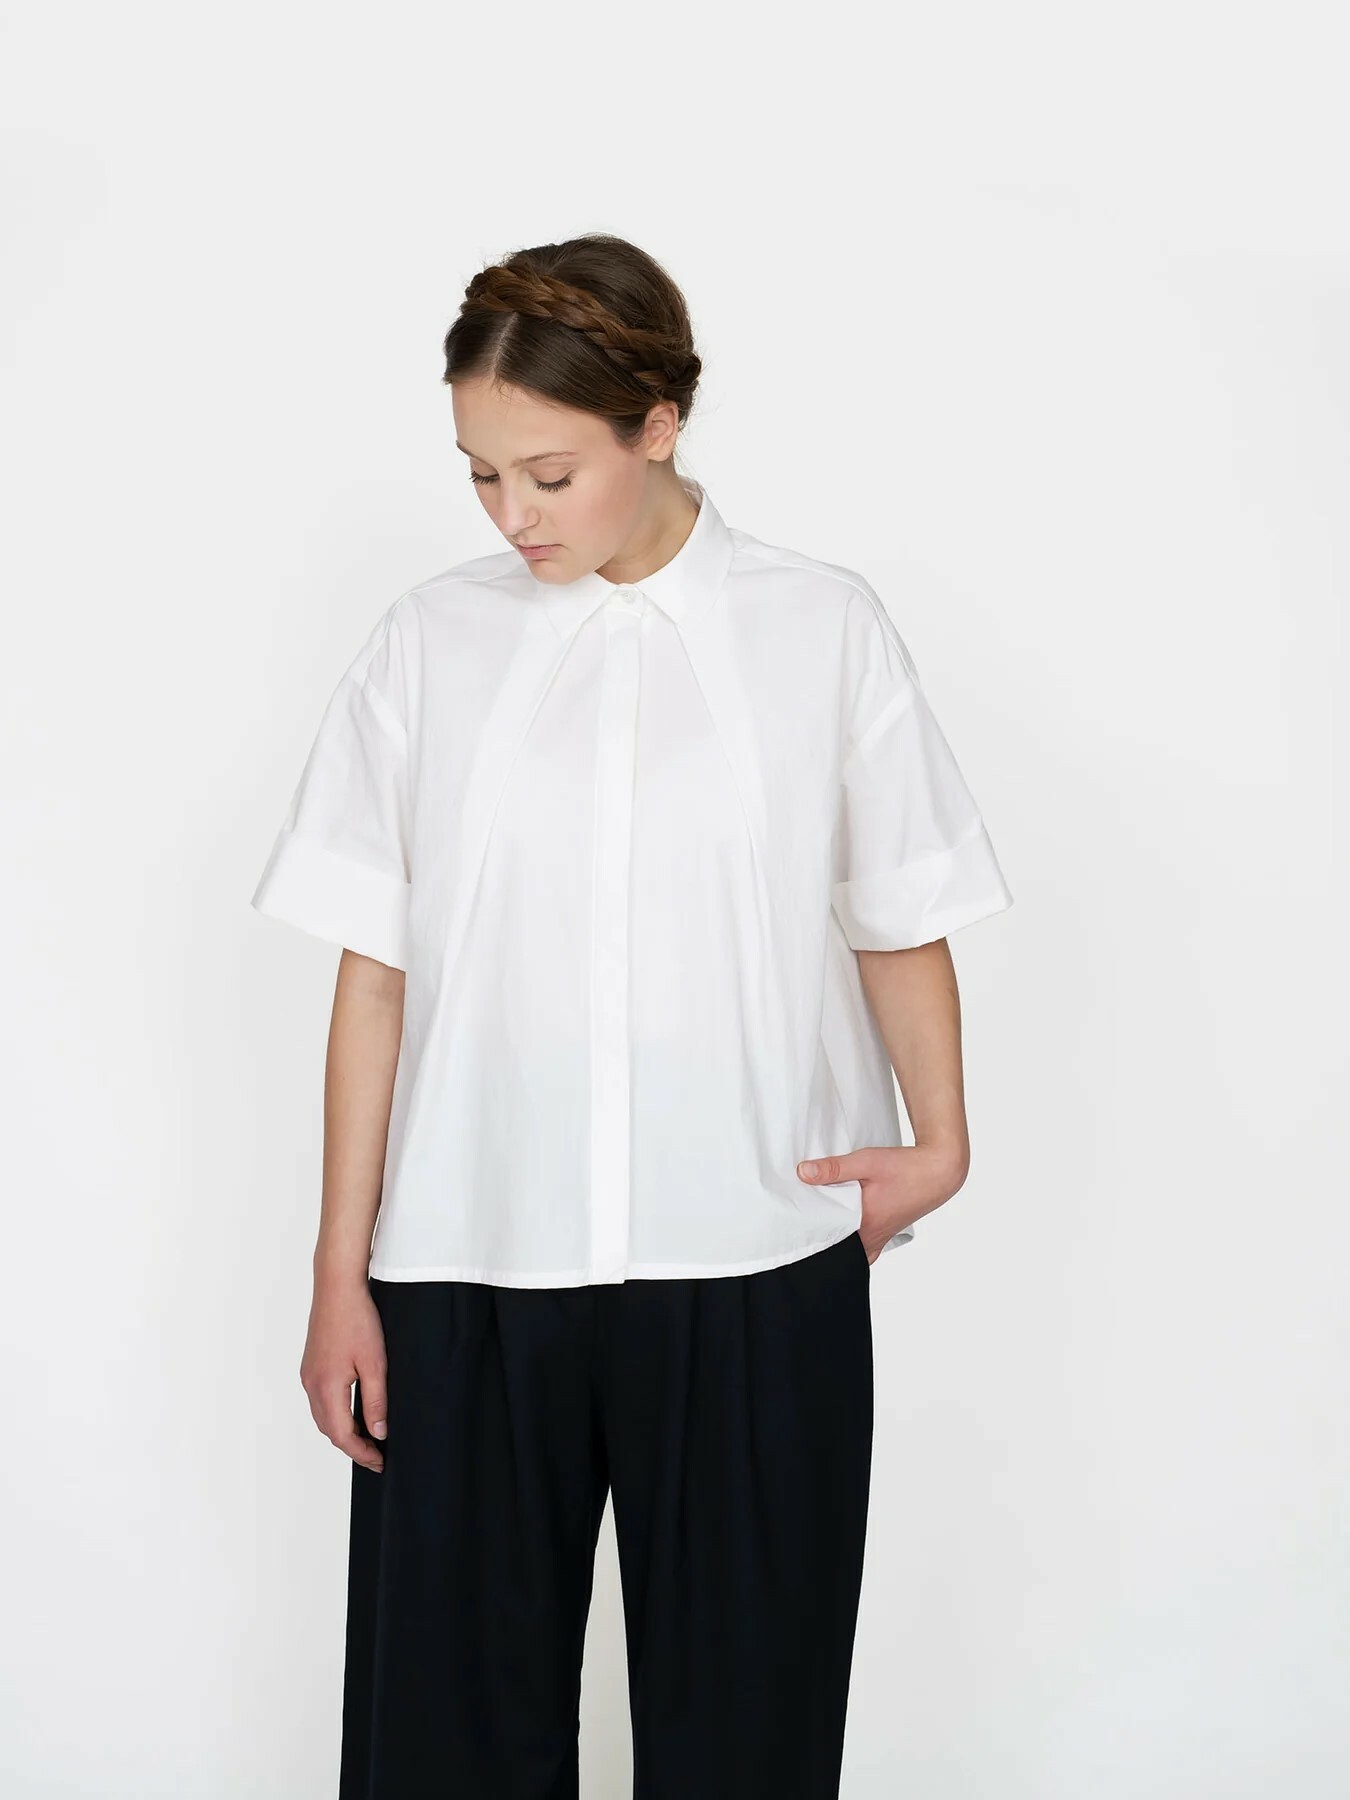 Buy The Assembly Line Front Pleat Shirt Sewing Pattern